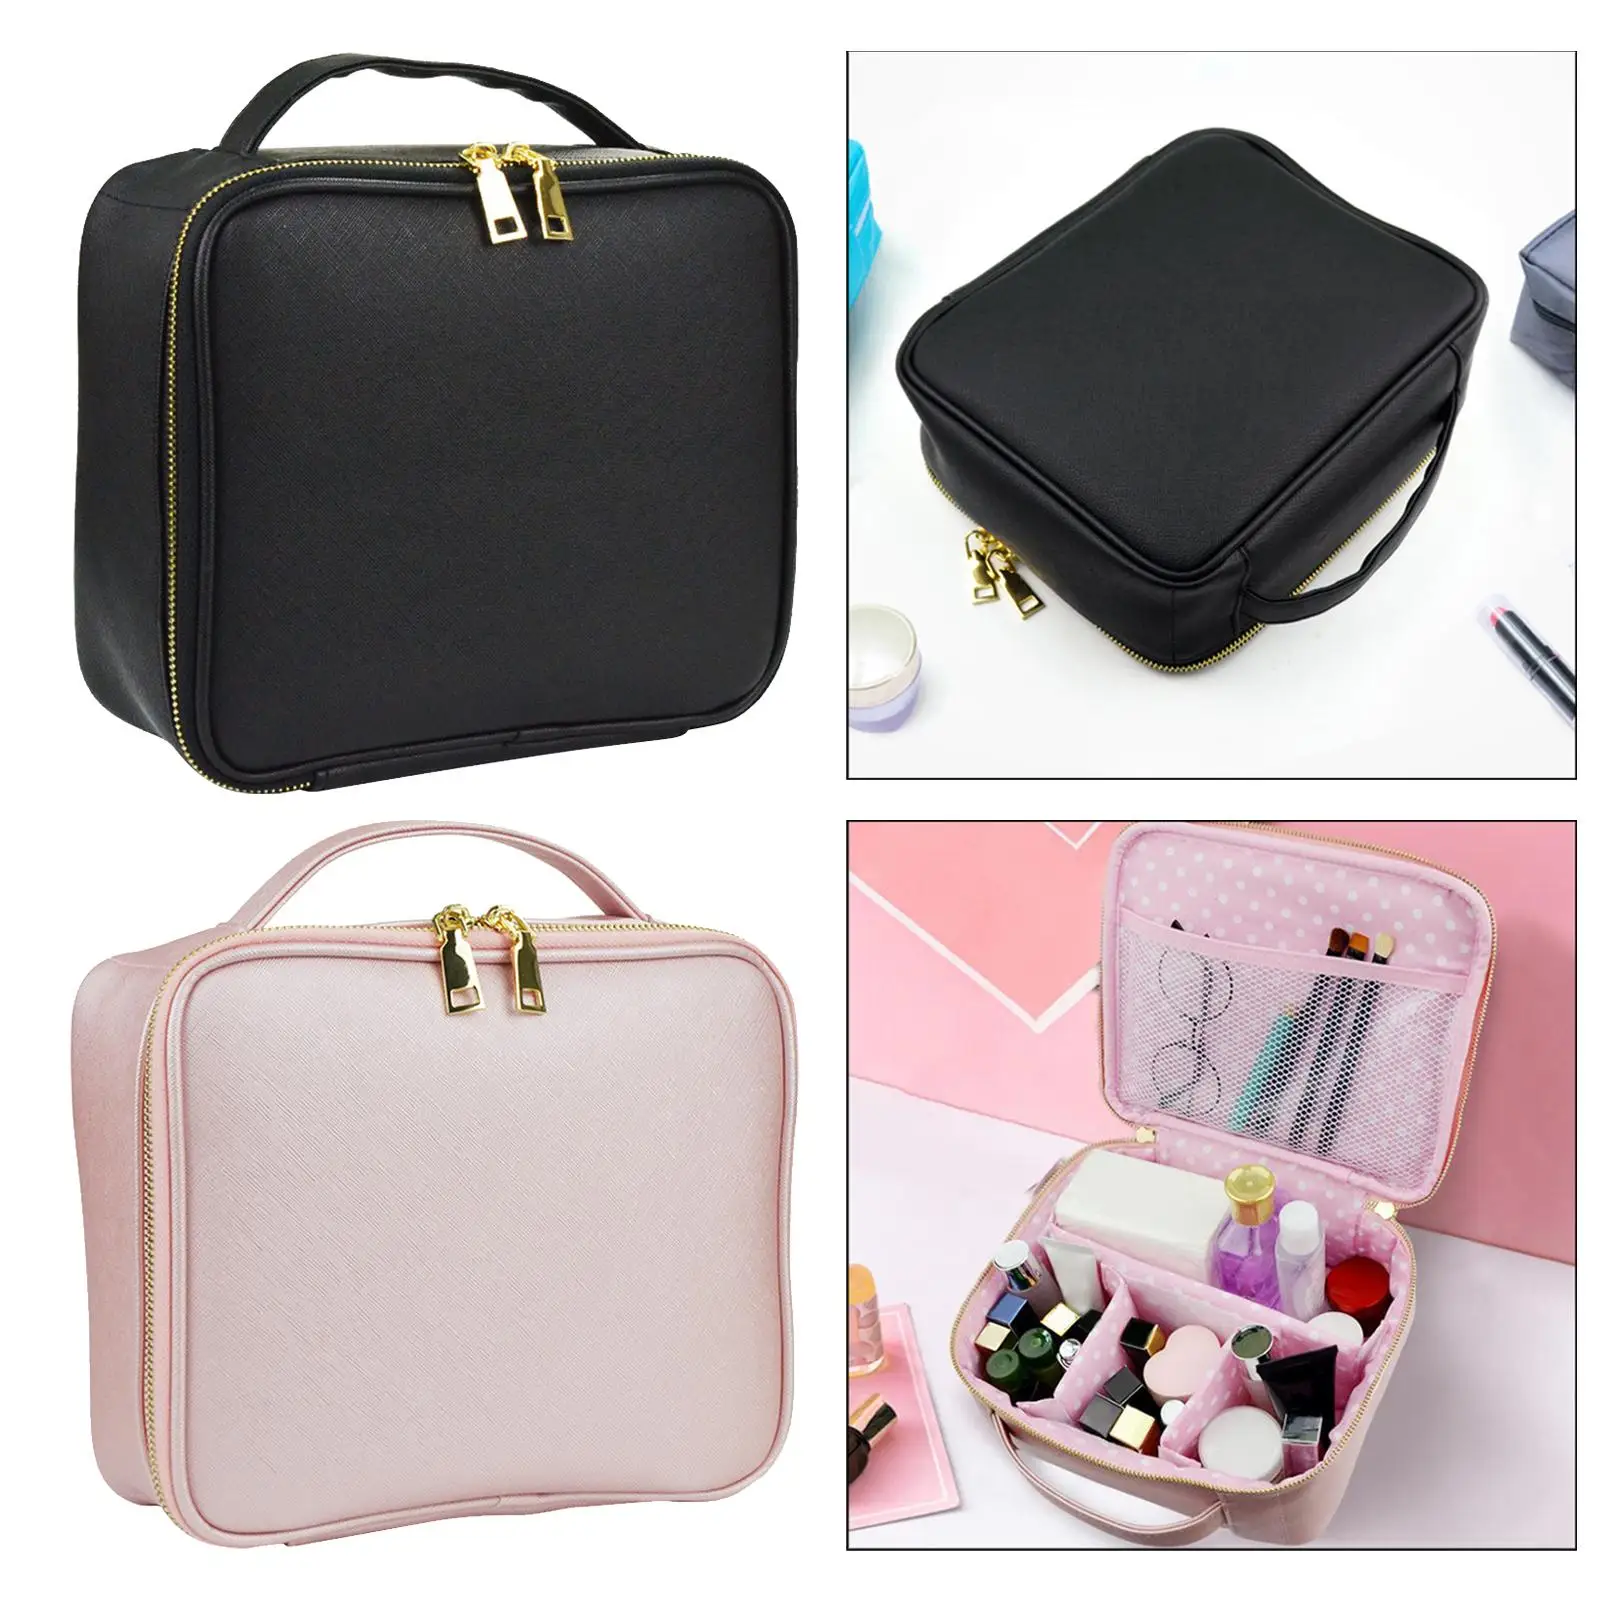 Travel Toiletry Case Storage Large Capacity Waterproof Container with Dividers Washable PU Portable for Toiletries Shampoo Women